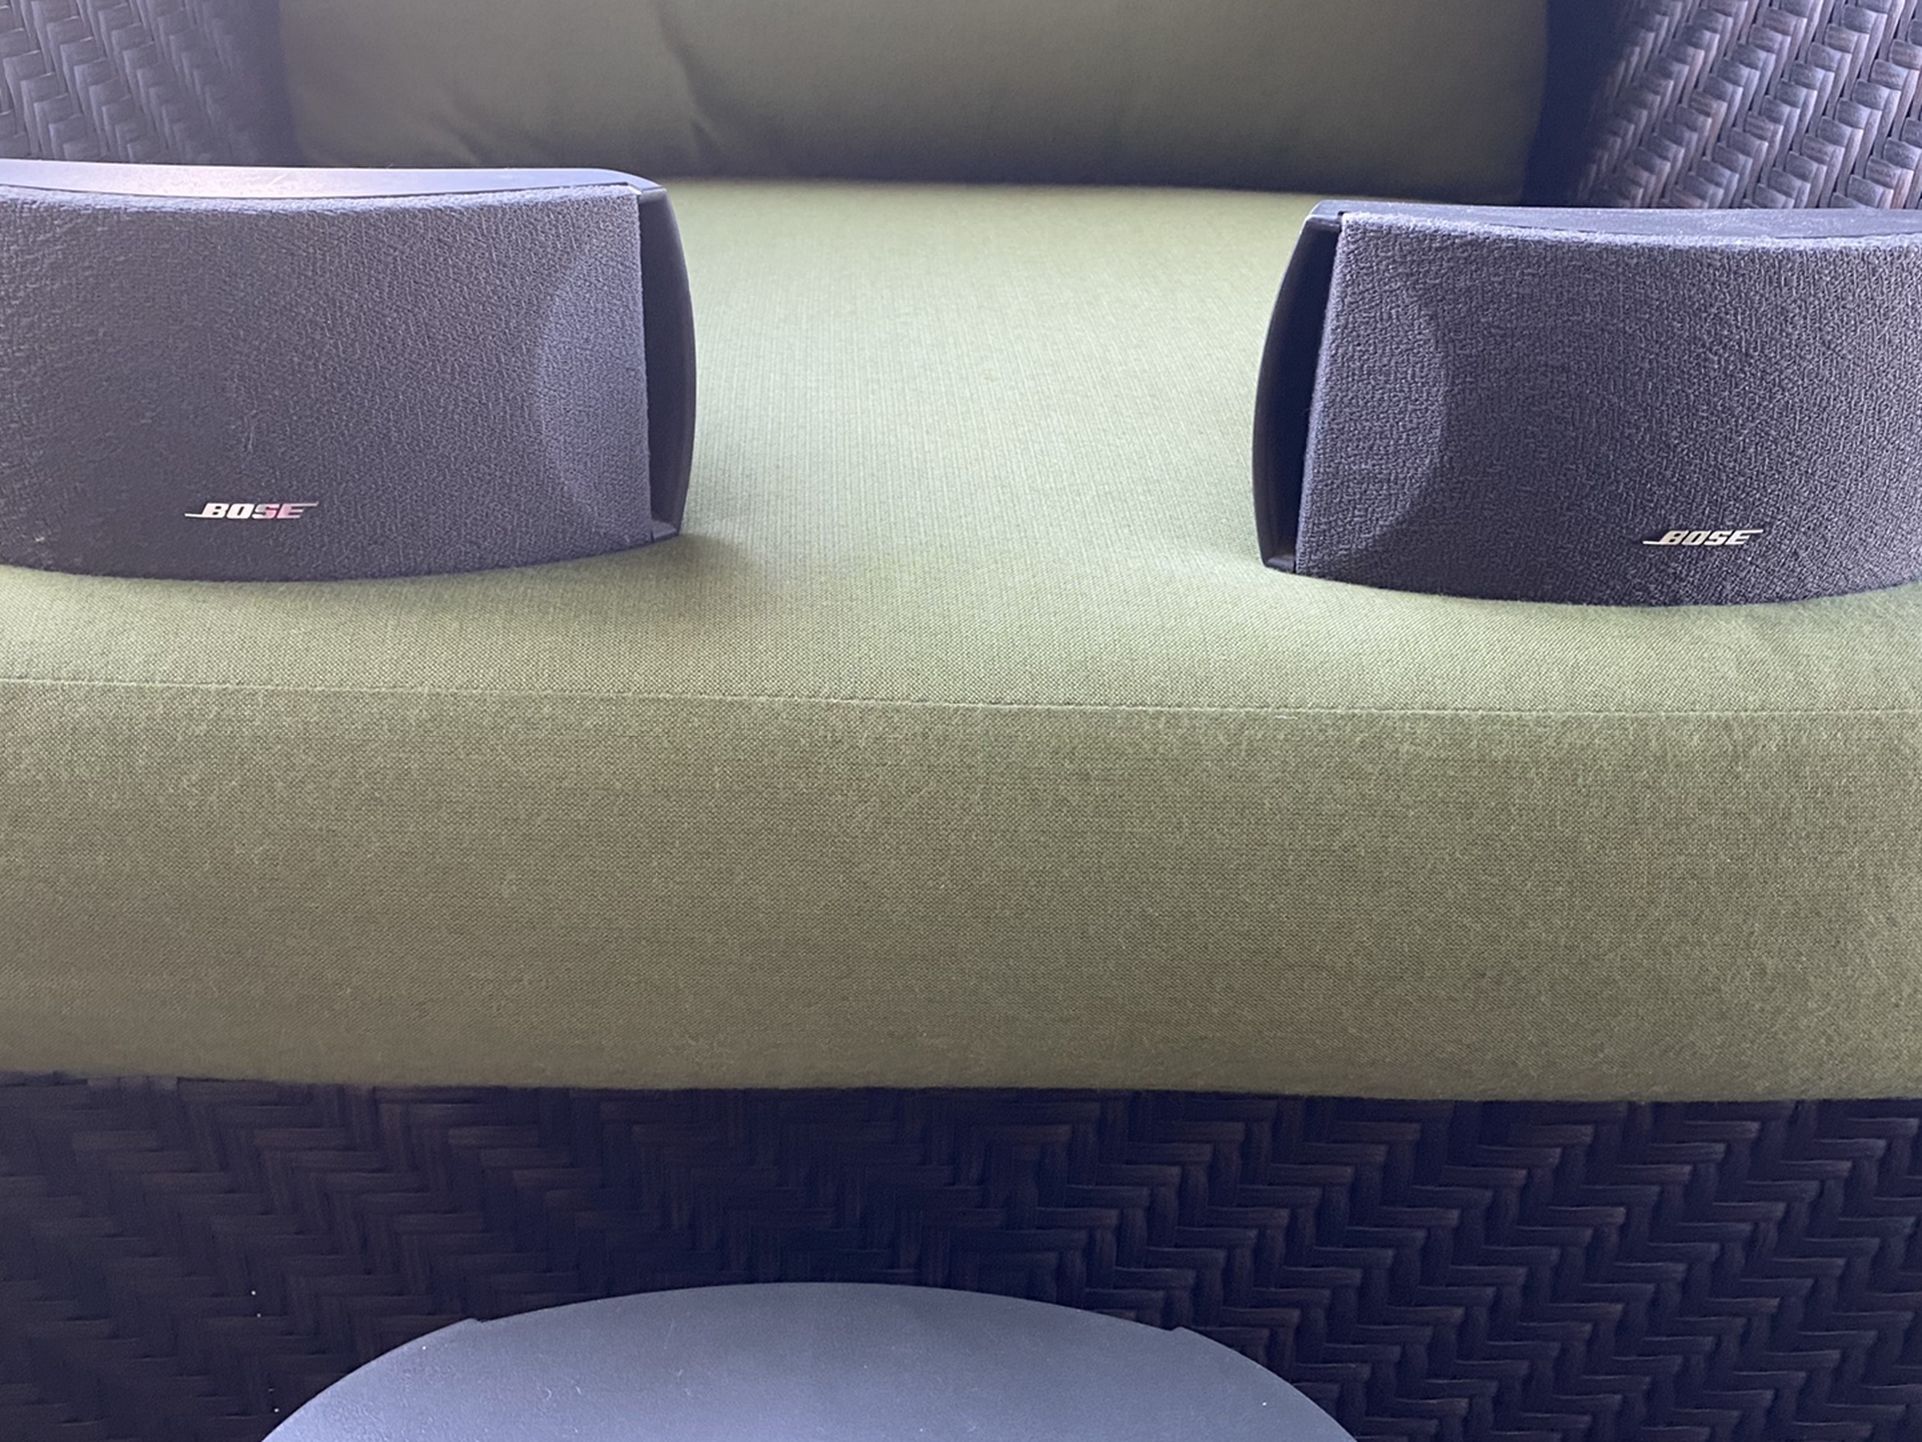 Bose CineMate home theater stereo speaker system